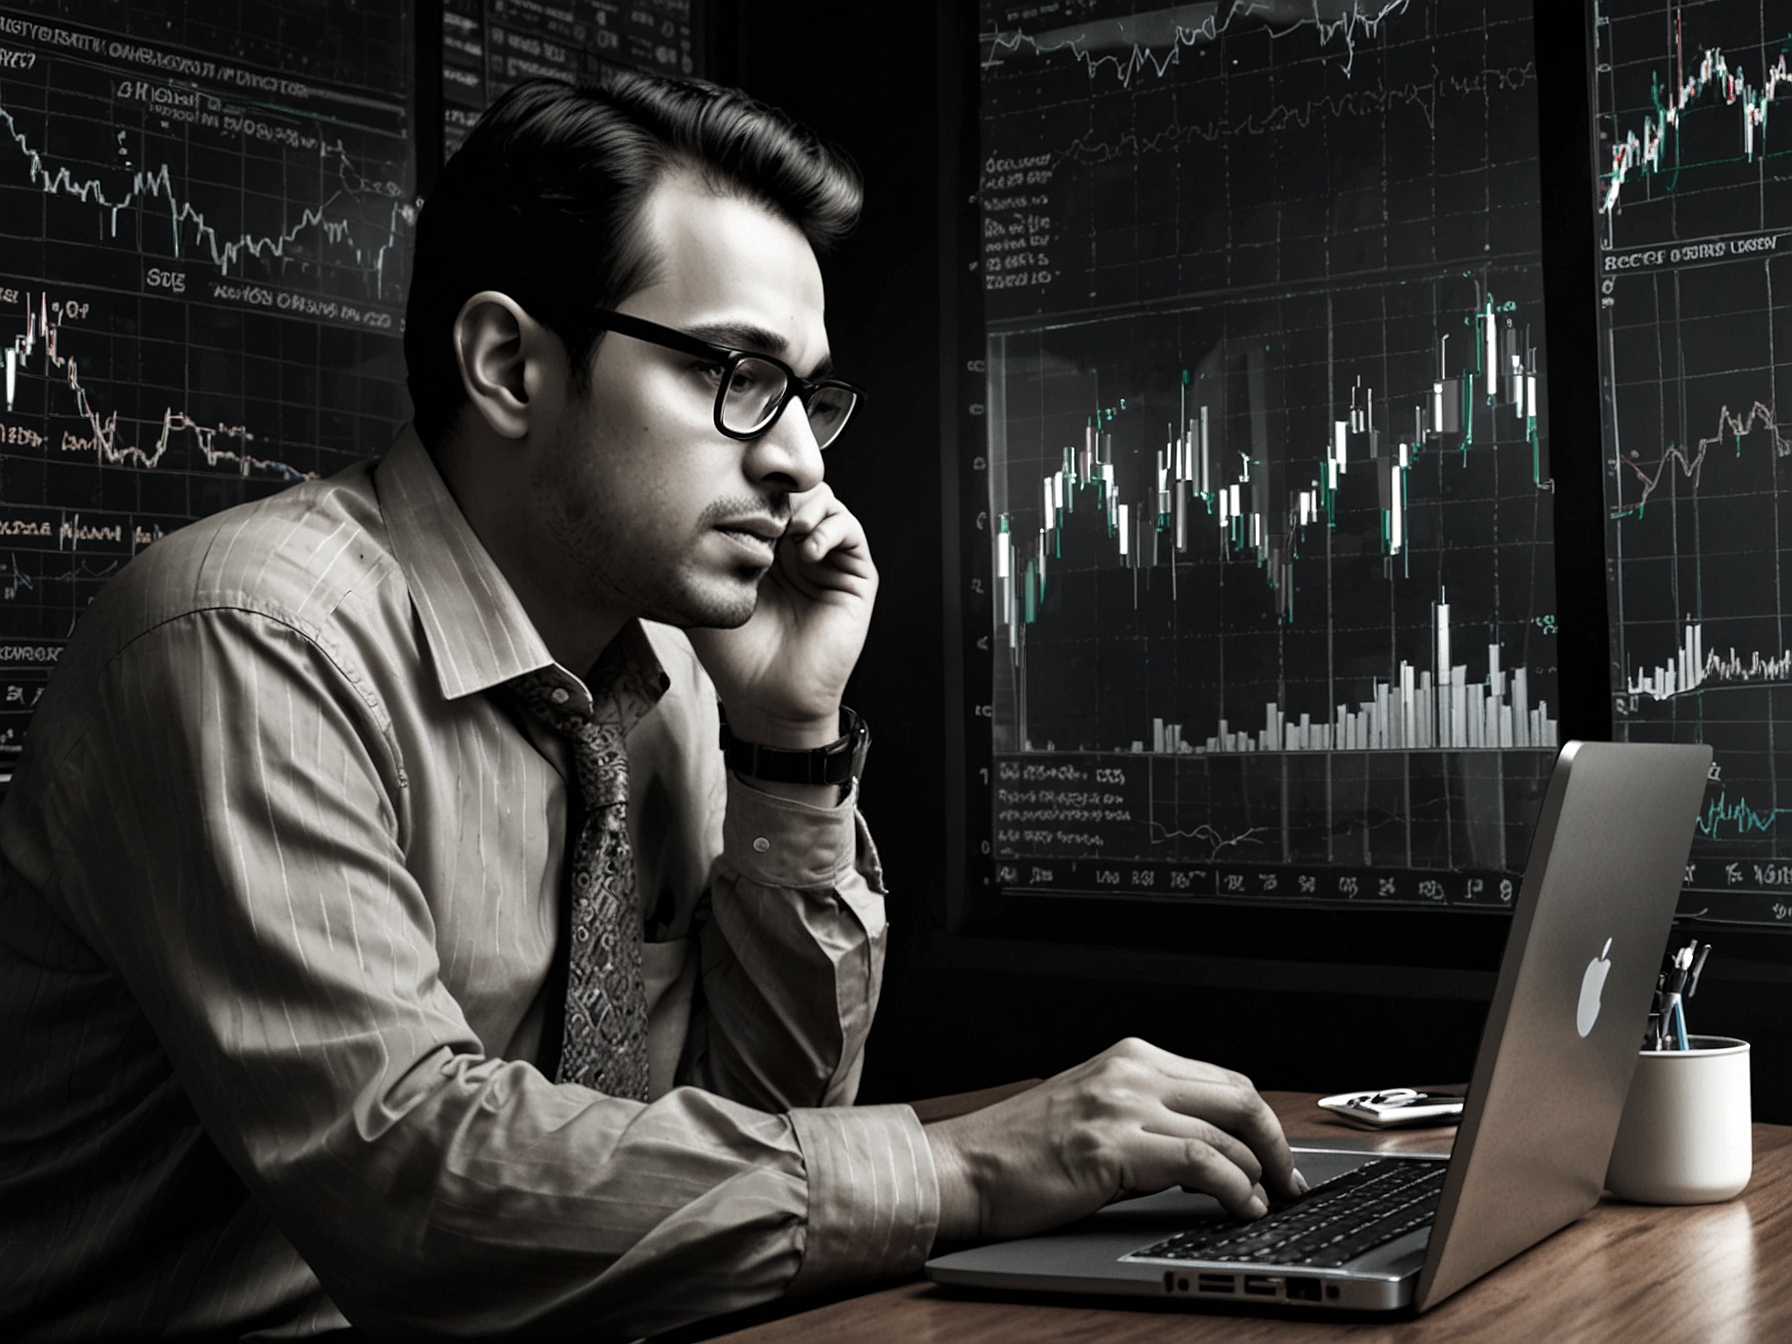 An investor analyzing stock charts on a laptop, representing the detailed market analysis and technical evaluations that form the basis of Sumeet Bagadia's stock recommendations.